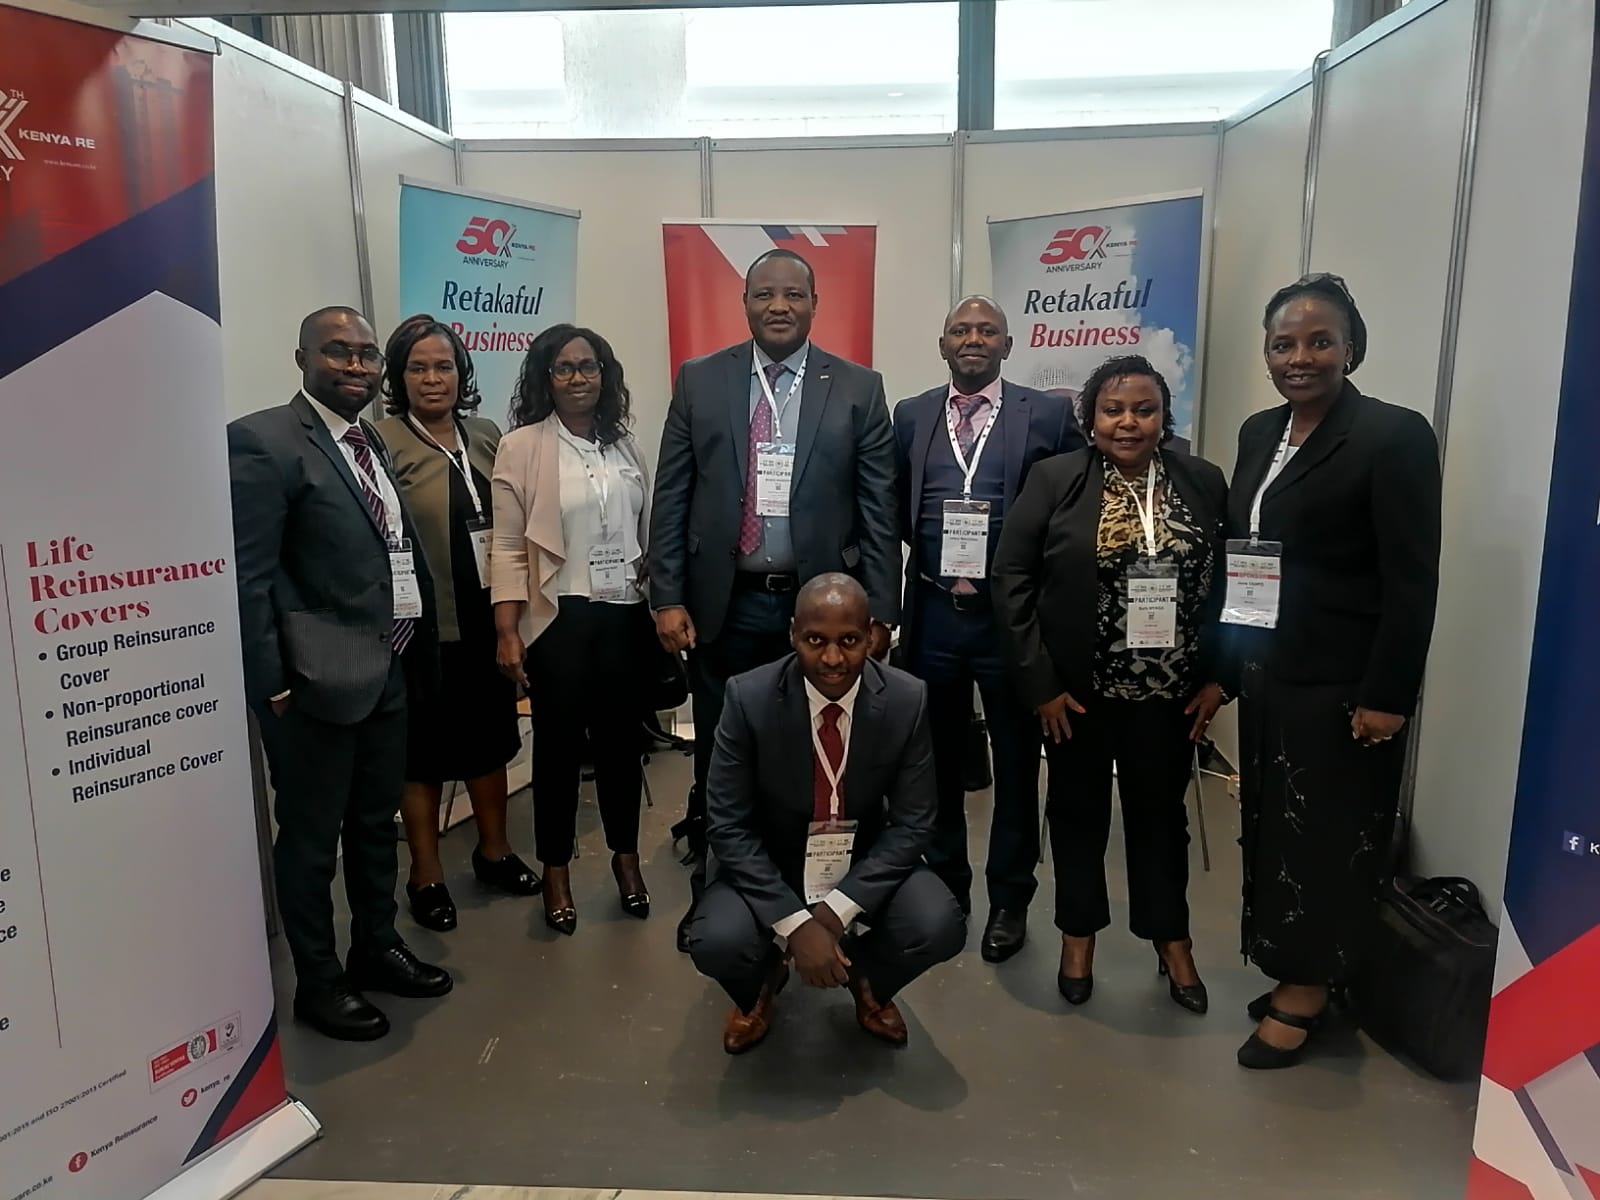 KENYA RE REPRESENTED AT AIO CONFERENCE IN ALGERIA